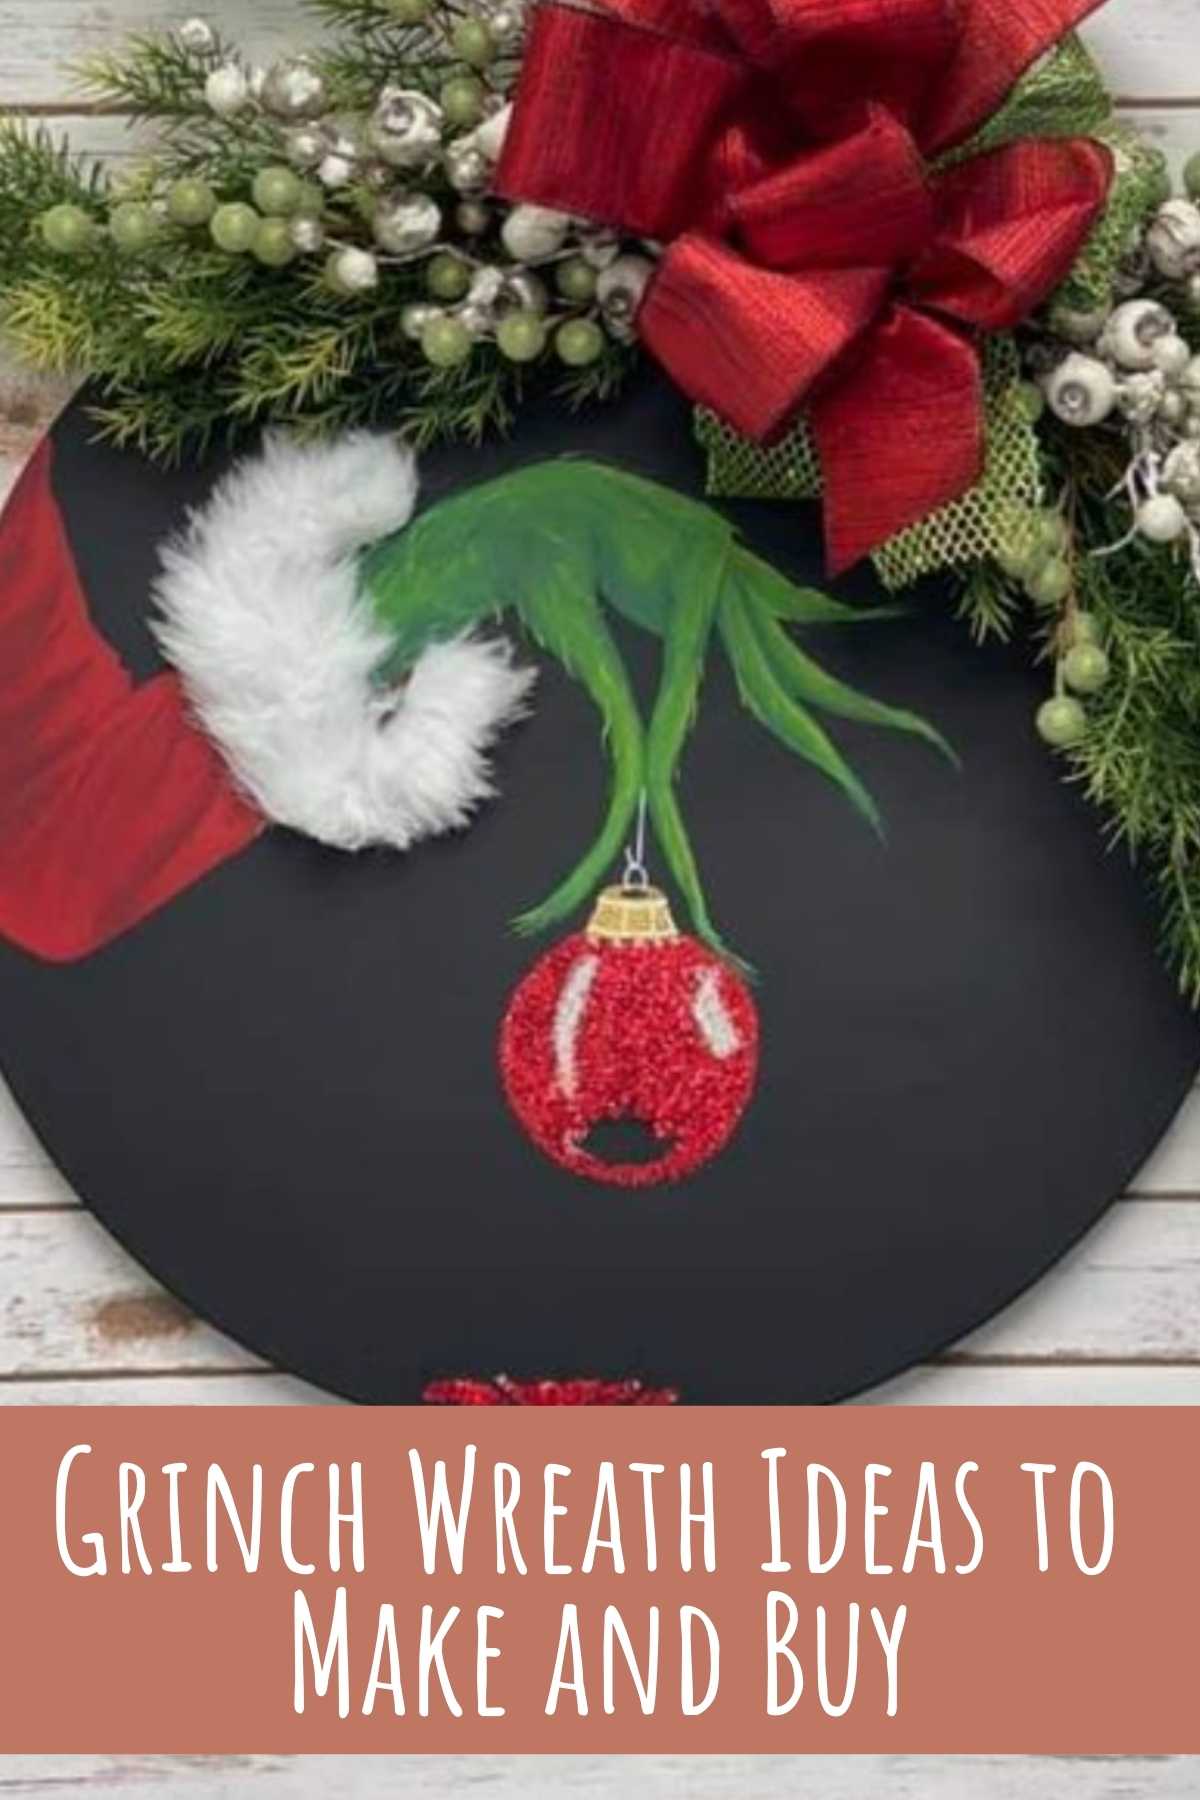 Grinch Wreath Ideas to Make and Buy